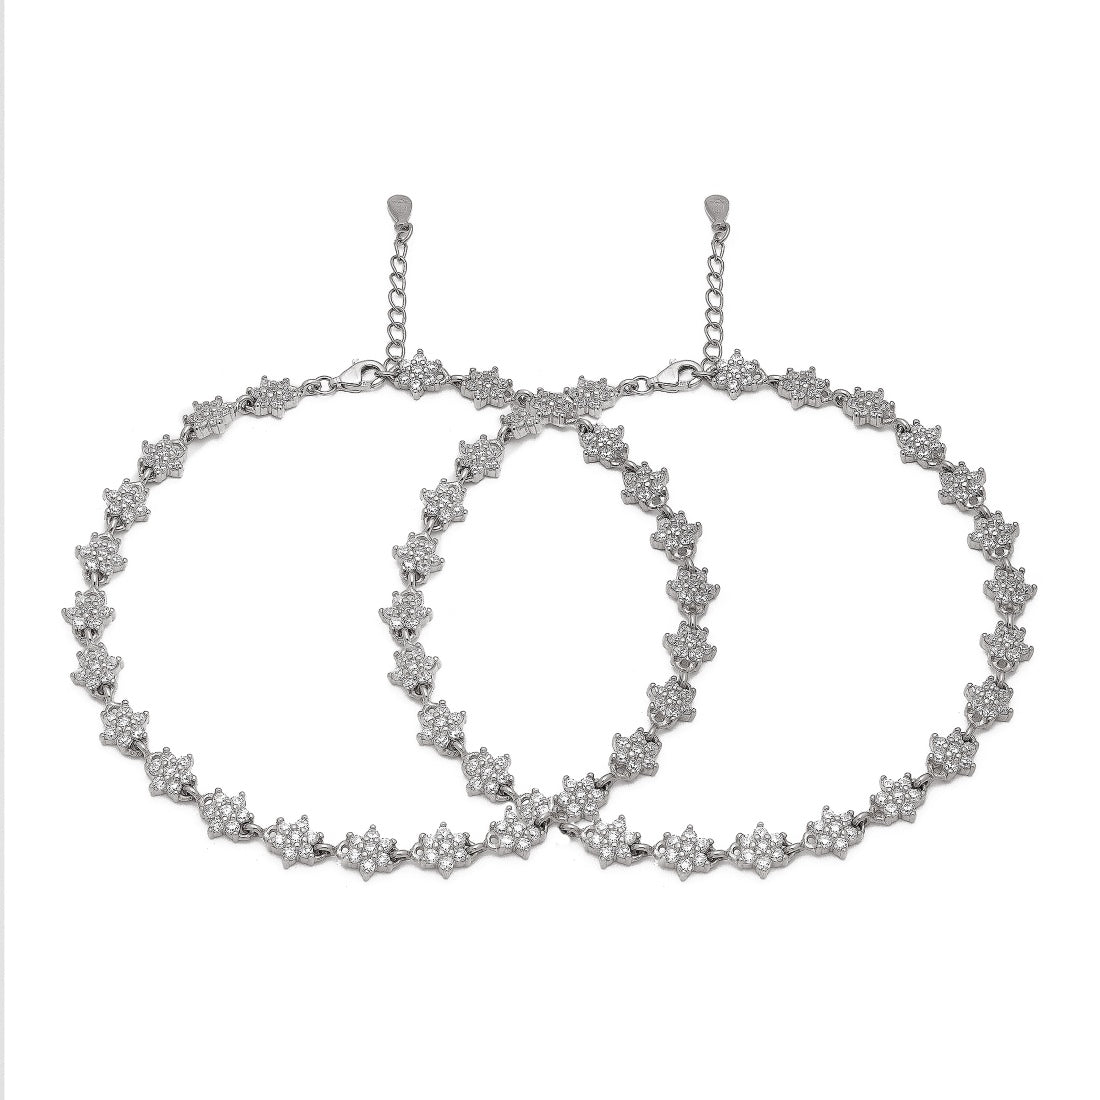 Blooming Beauty 925 Sterling Silver Rhodium-Plated Flower Anklet